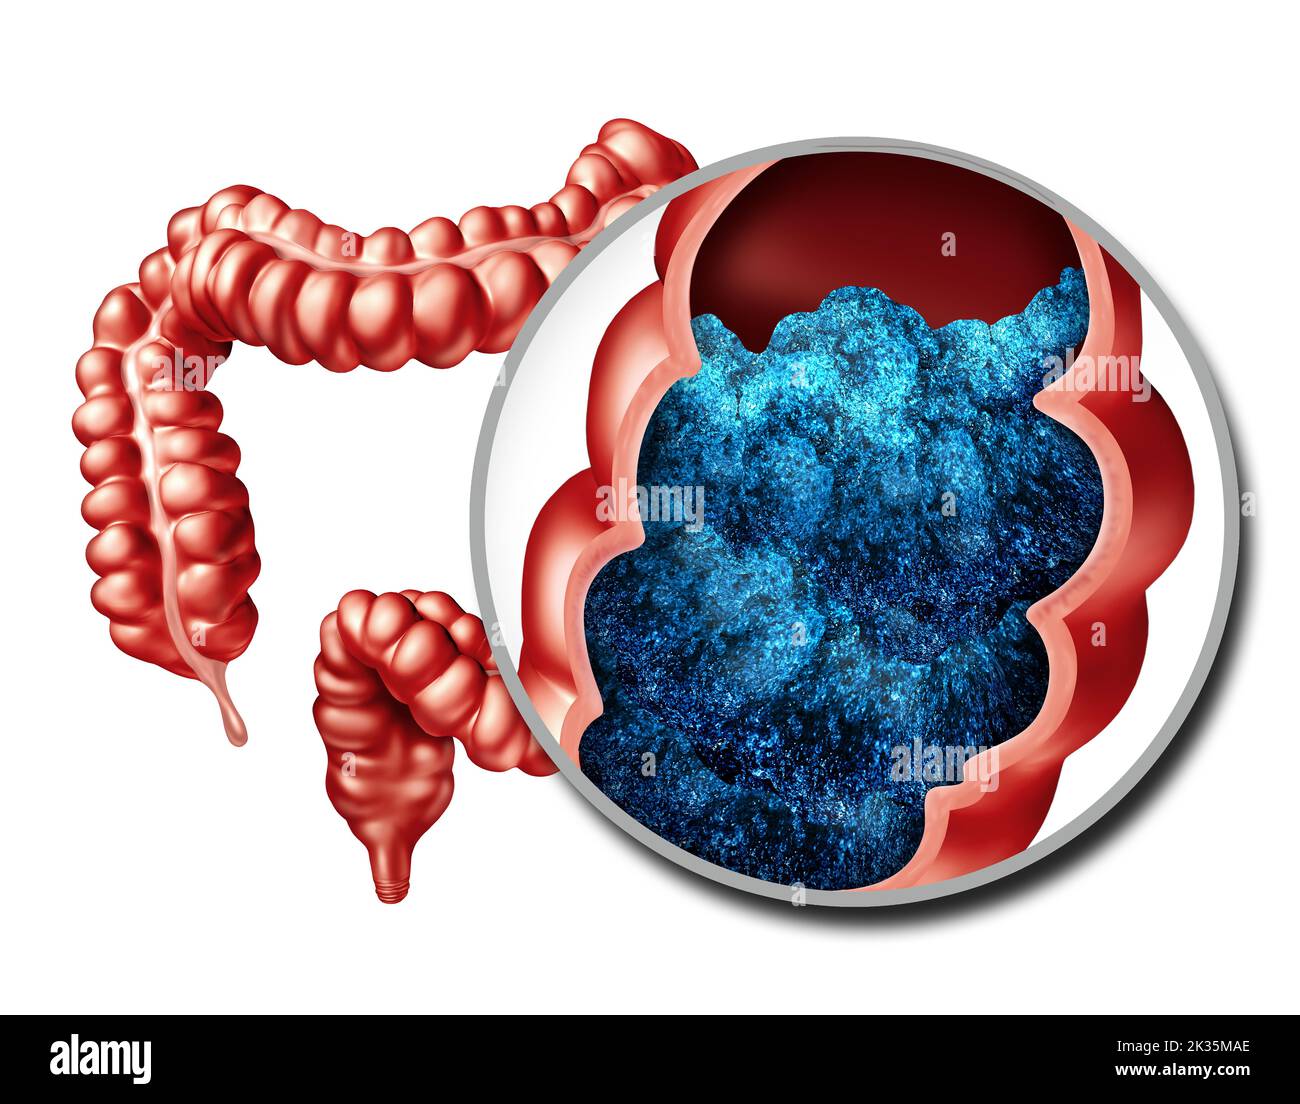 Intestine Bloating And constipation anatomy or constipated symptoms as stool bowel movement problem of a digestive system as a gastrointestinal Stock Photo